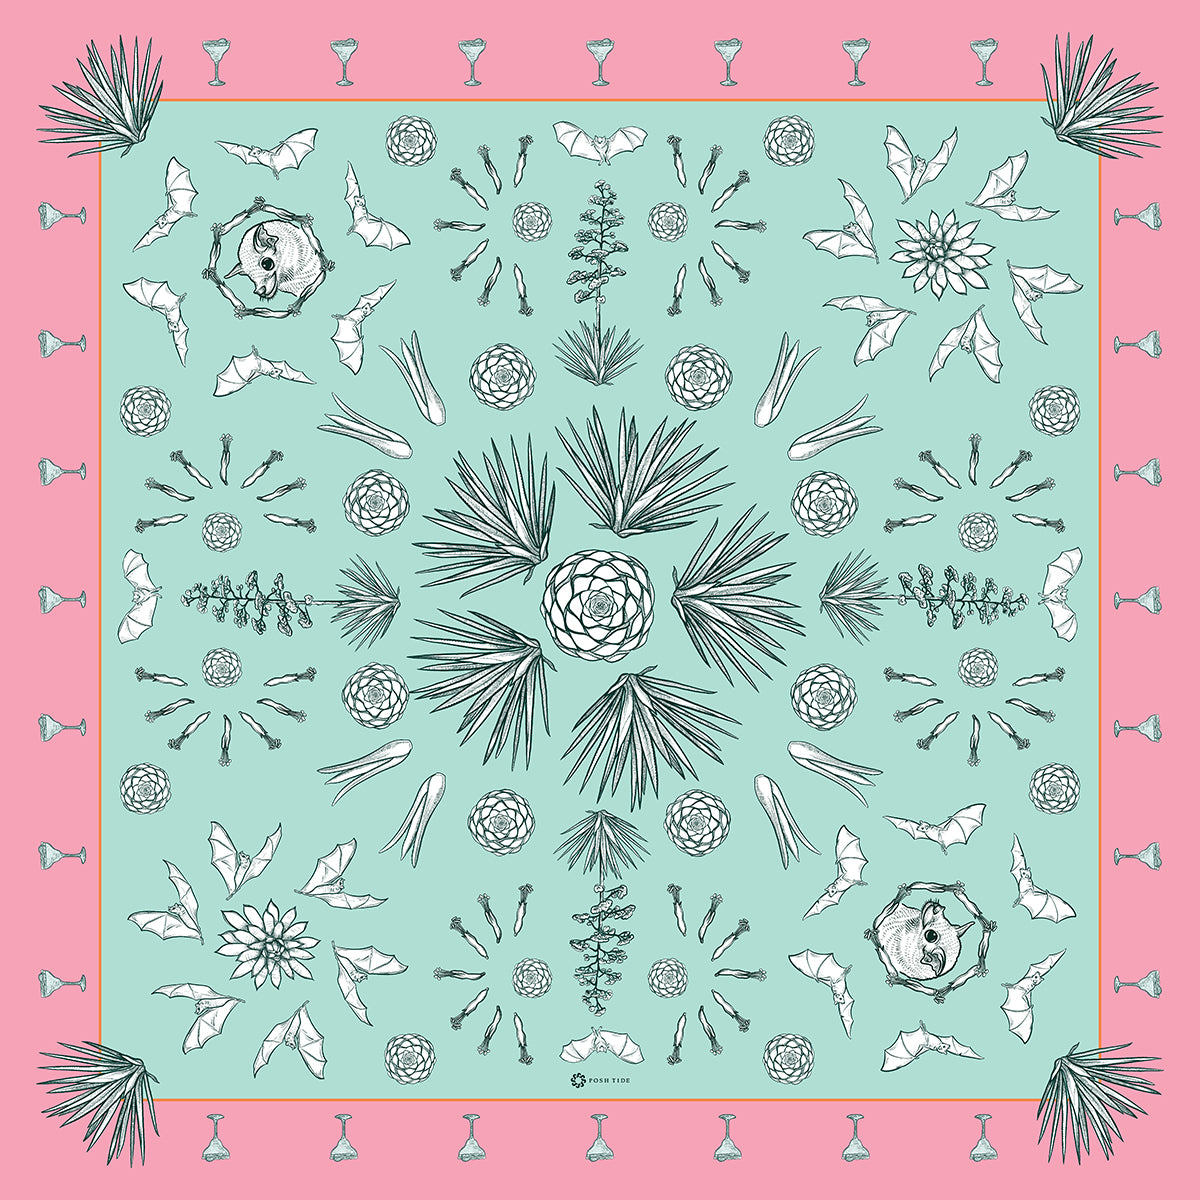 Scarf with cool mint interior and a pink band decorated with agave and bats which have co-evolved together for thousands of years.